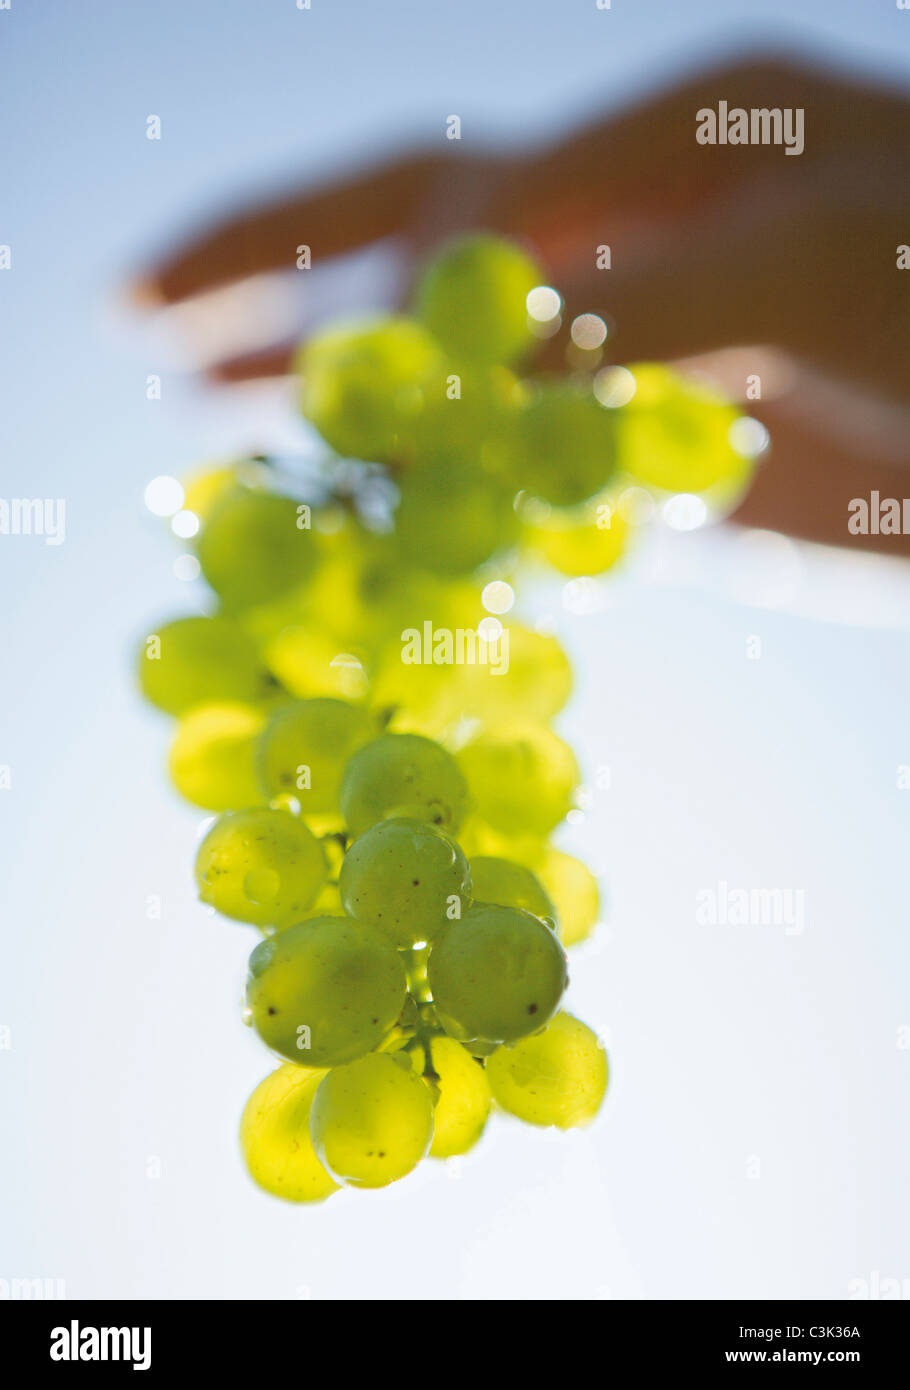 France, Burgundy, Human hands holding bunch of grapes Stock Photo